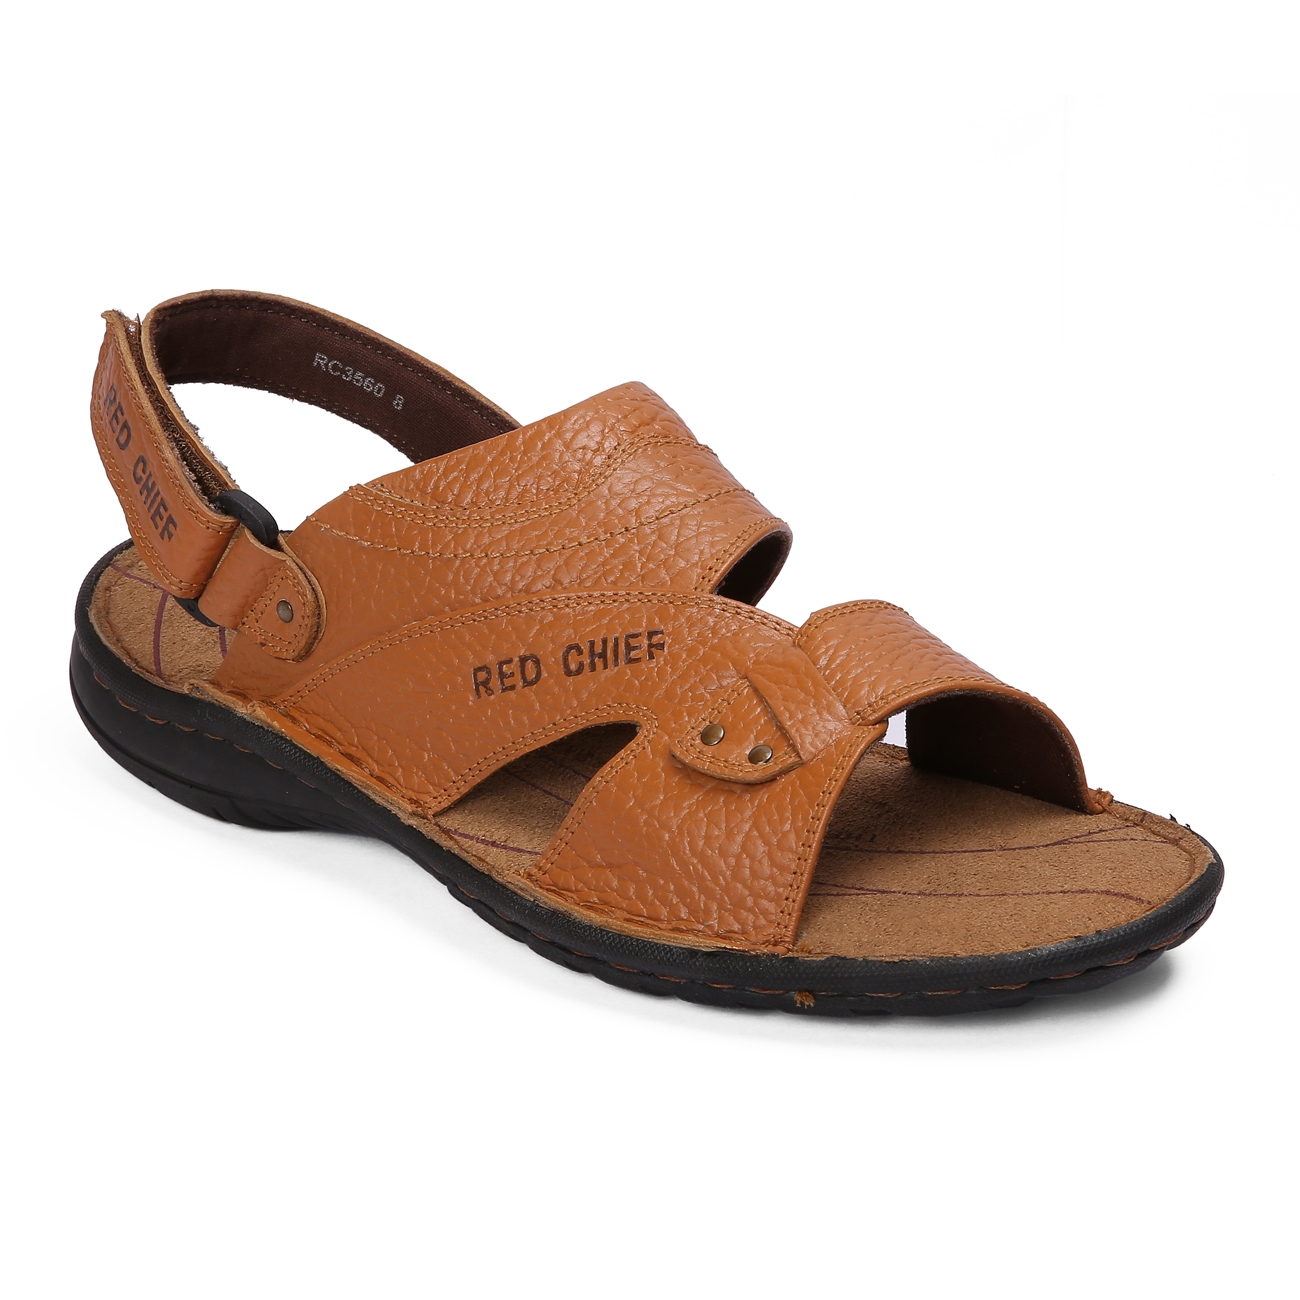 RED CHIEF | RC3560 107 - Tan Sandals